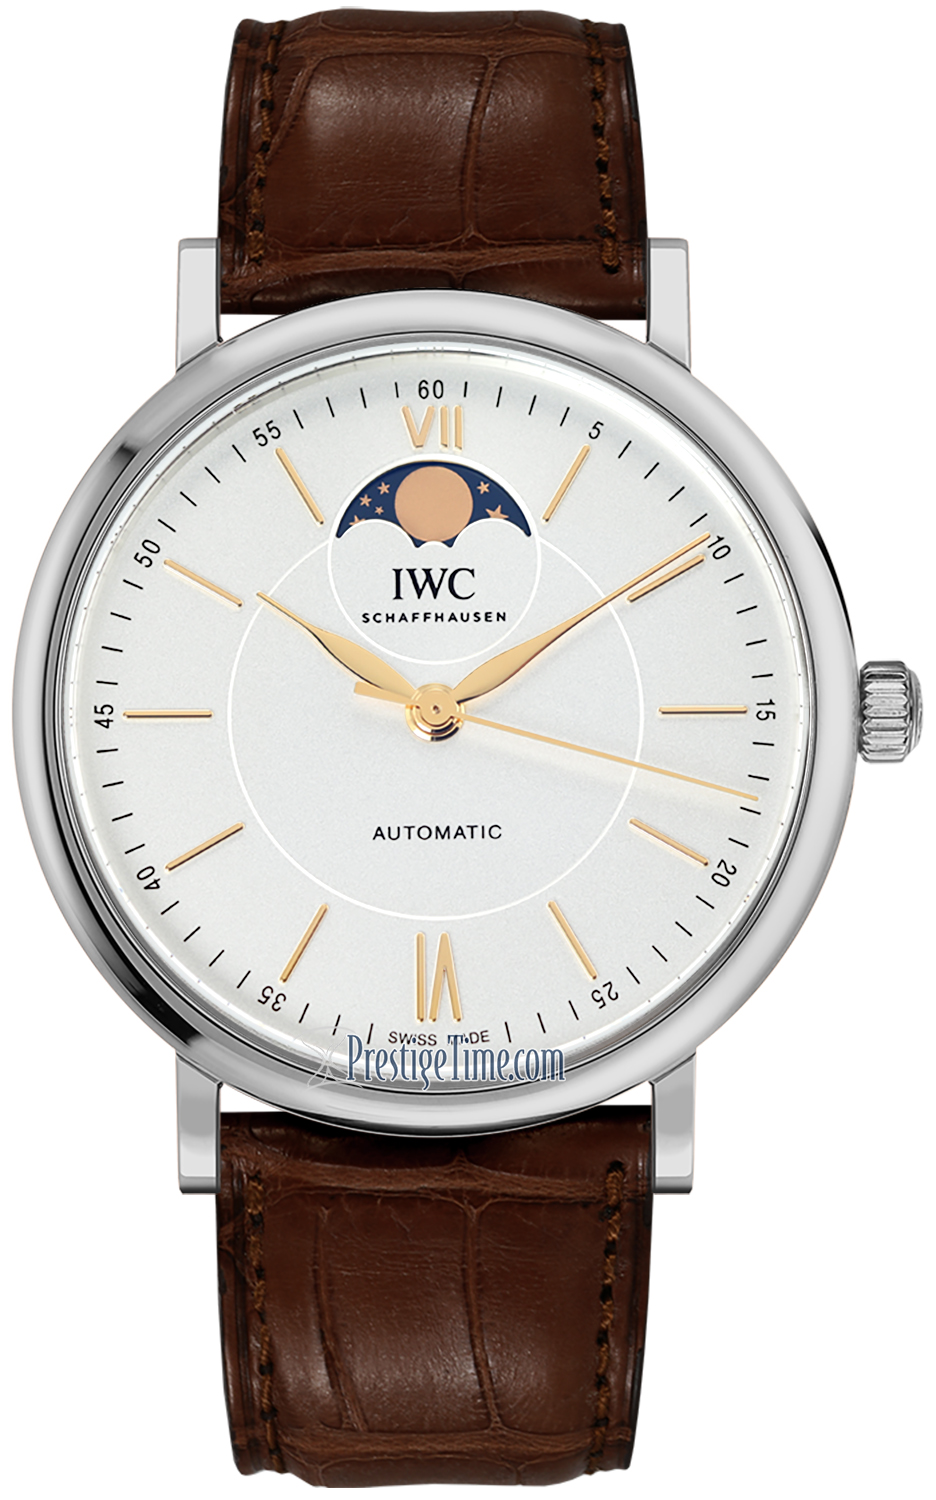 Kent Riet Nationaal volkslied iw459401 IWC Portofino Automatic Moonphase 40mm Mens Watch